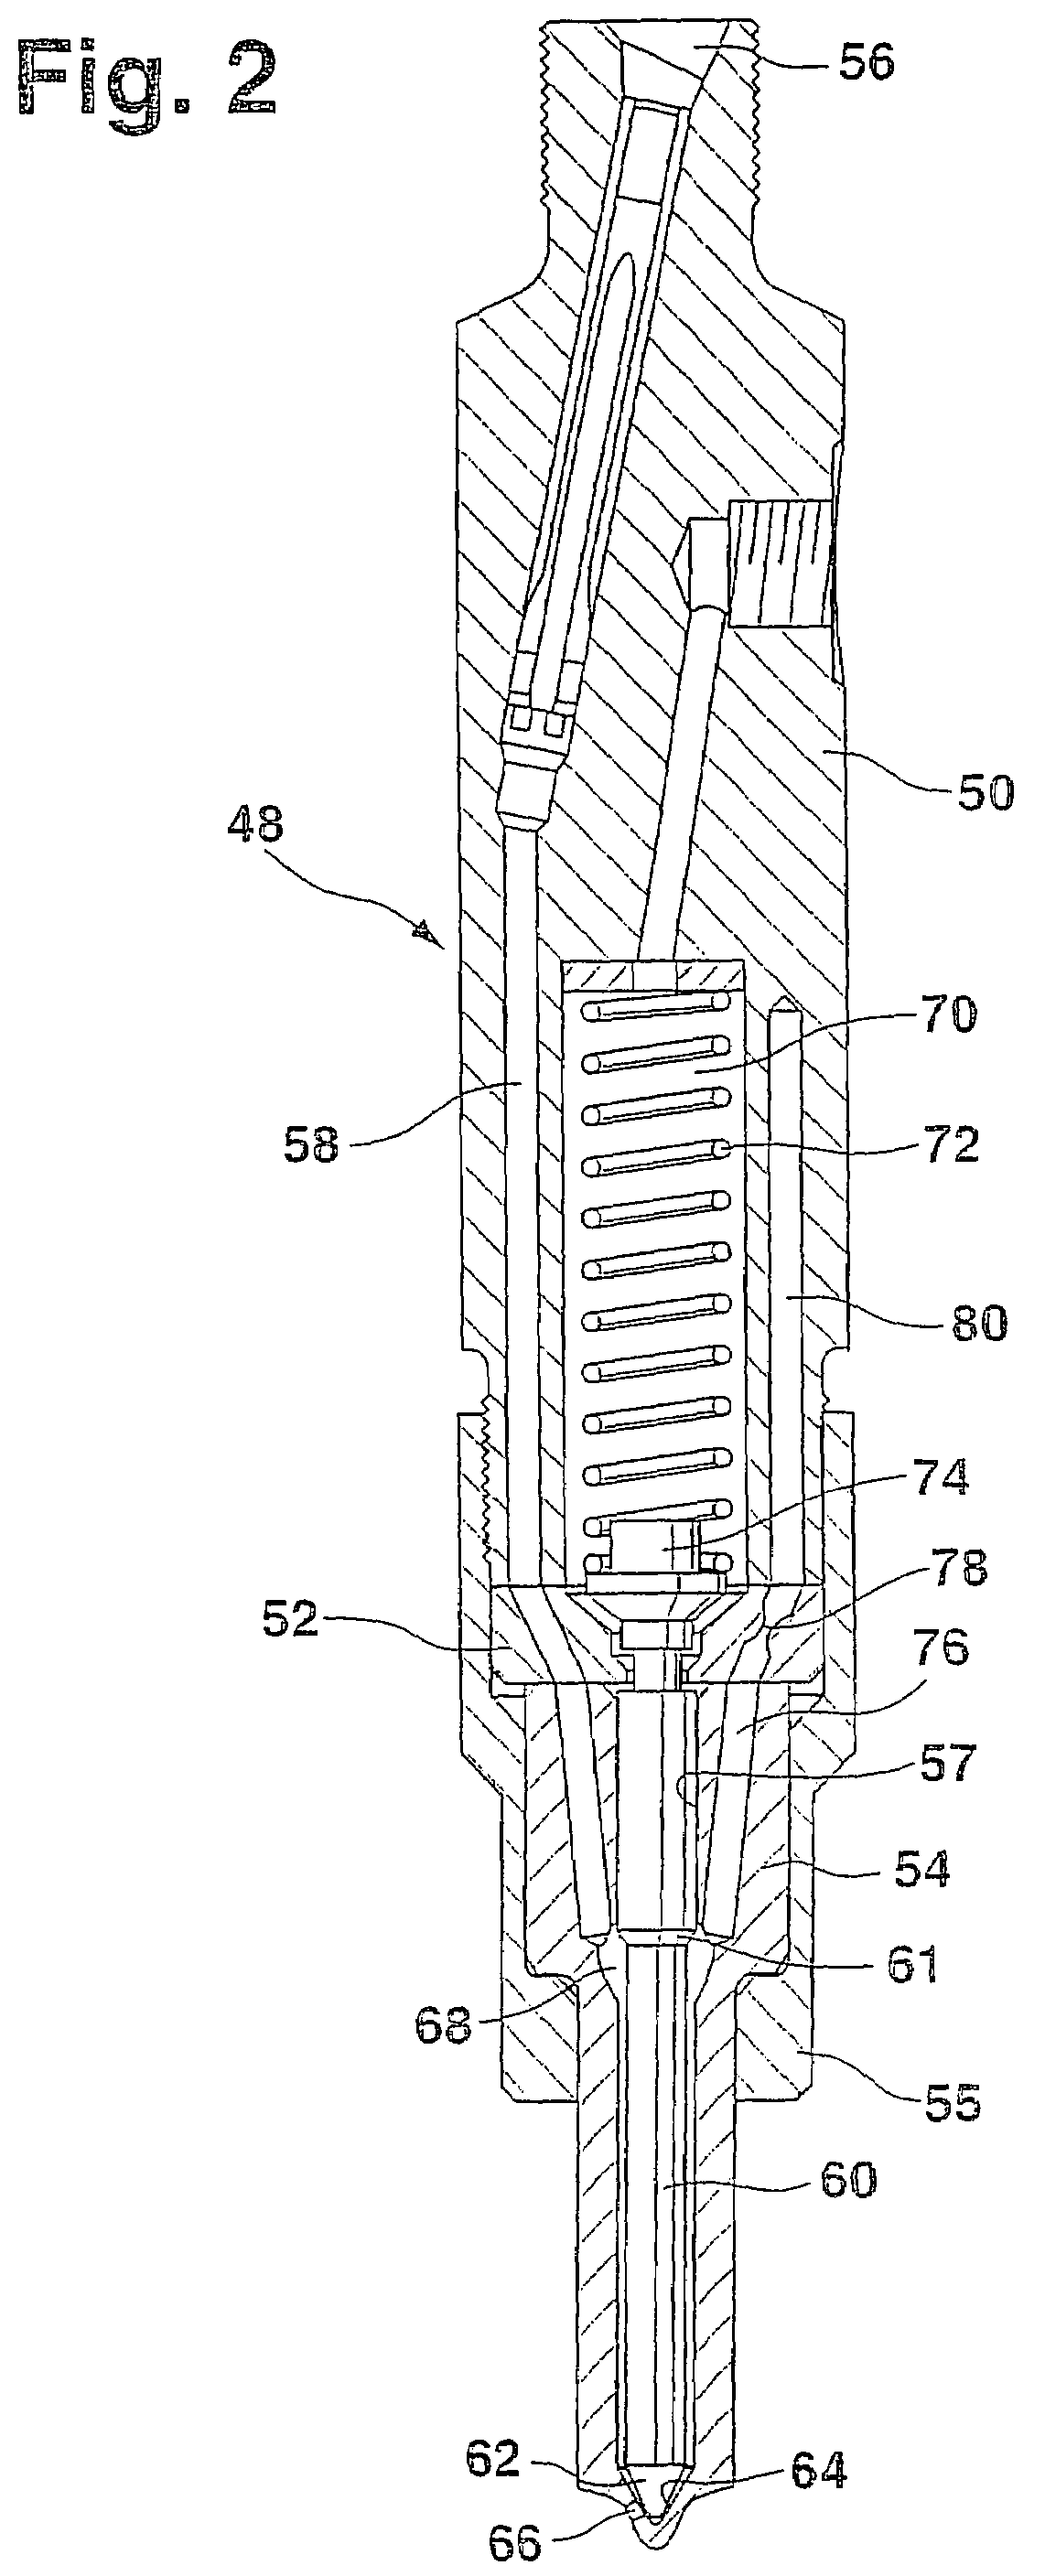 Fuel injection valve for internal combustion engines with damping chamber reducing pressure oscillations